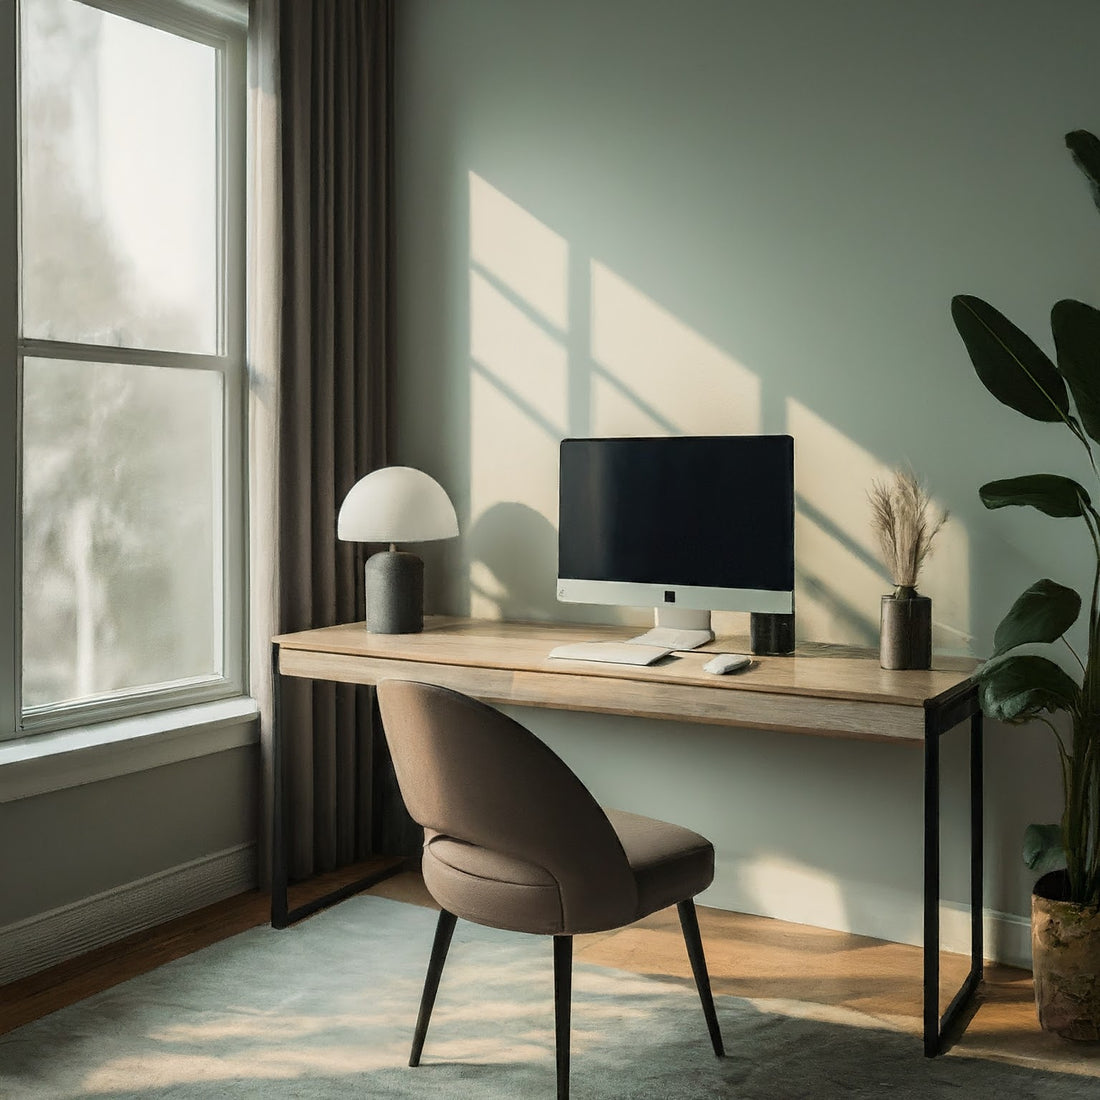 vydko.com - Productivity: The Role of Lighting in Home Offices